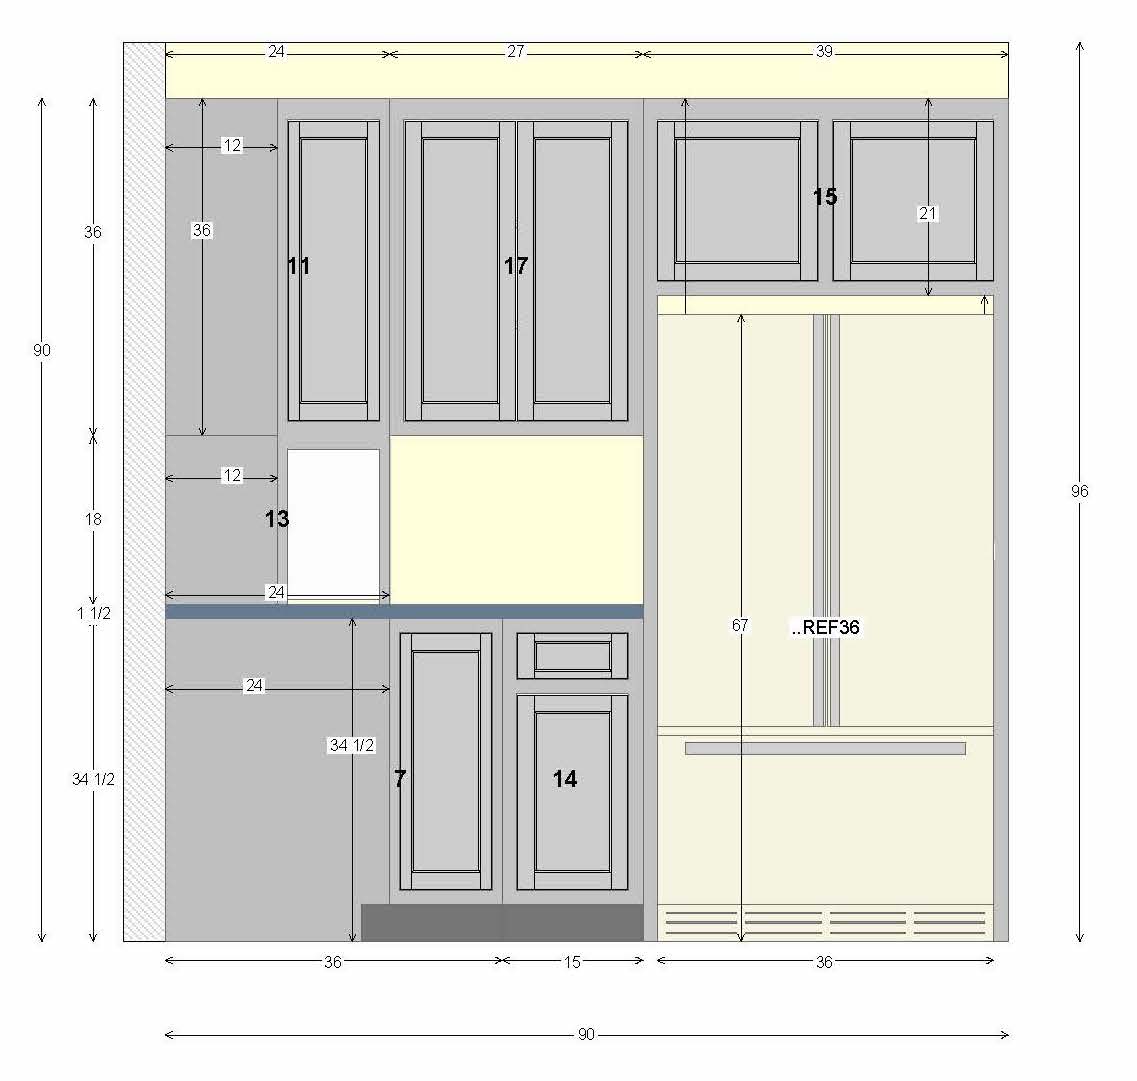 A diagram of the right wall of a U-shaped kitchen layout.